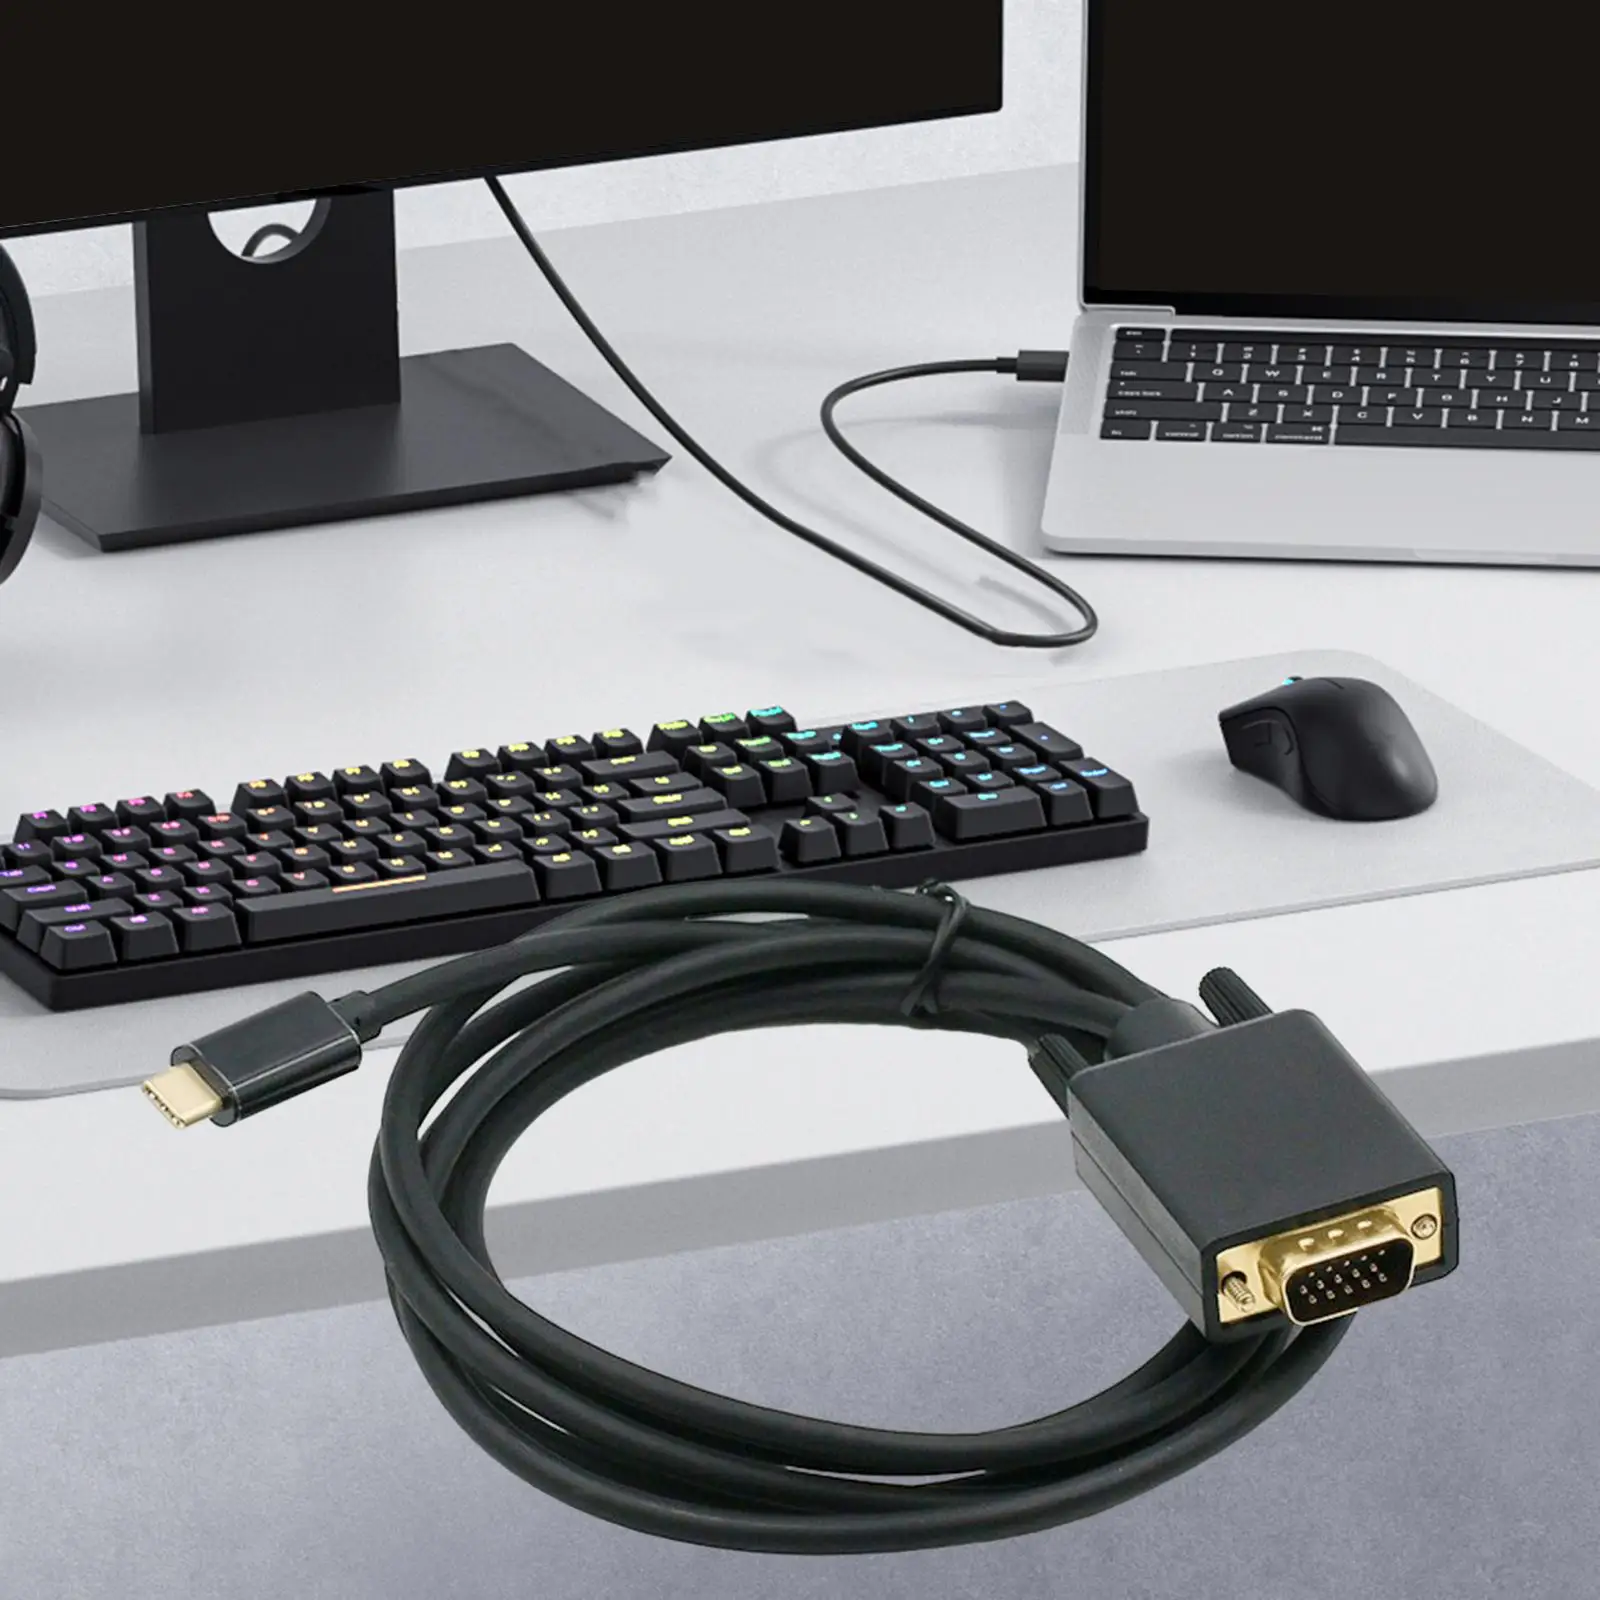 USB C to VGA Cable Monitors Computer USB Type C to VGA Conferences Smartphones Demo 1080P Trainings Gaming 6ft Converter Cable